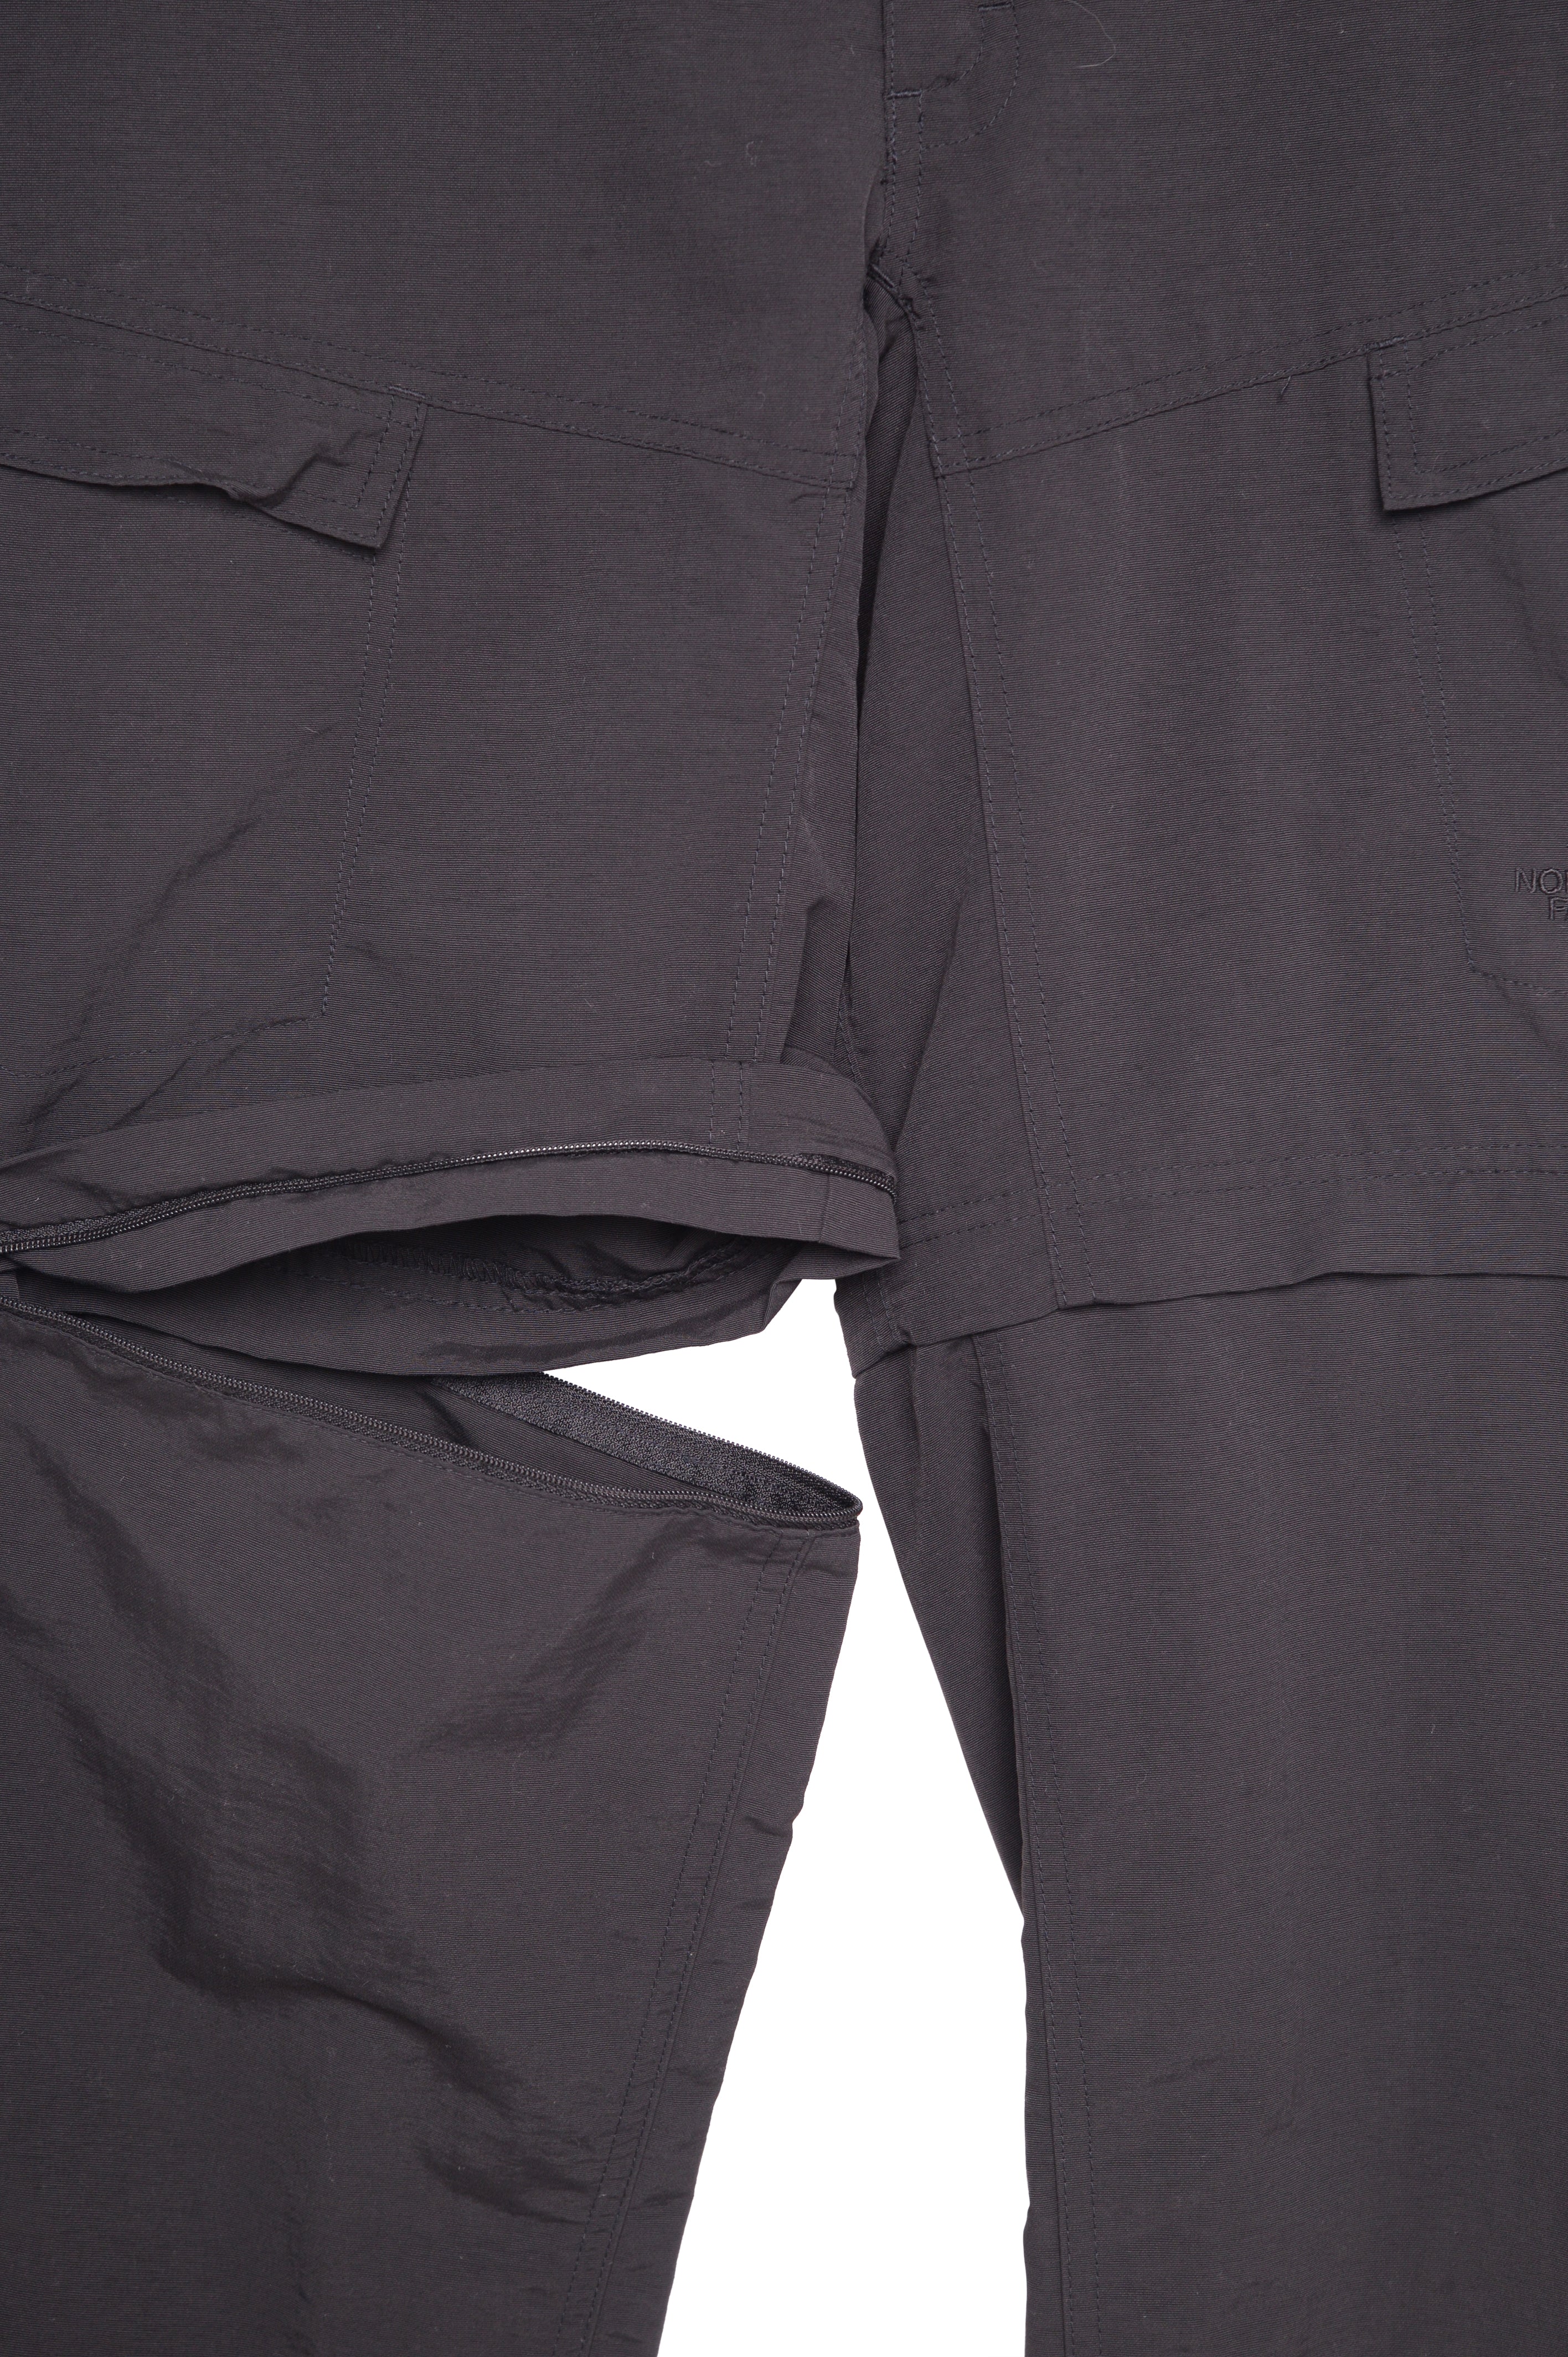 The North Face NSE Convertible logo-patch Cargo Pants - Farfetch